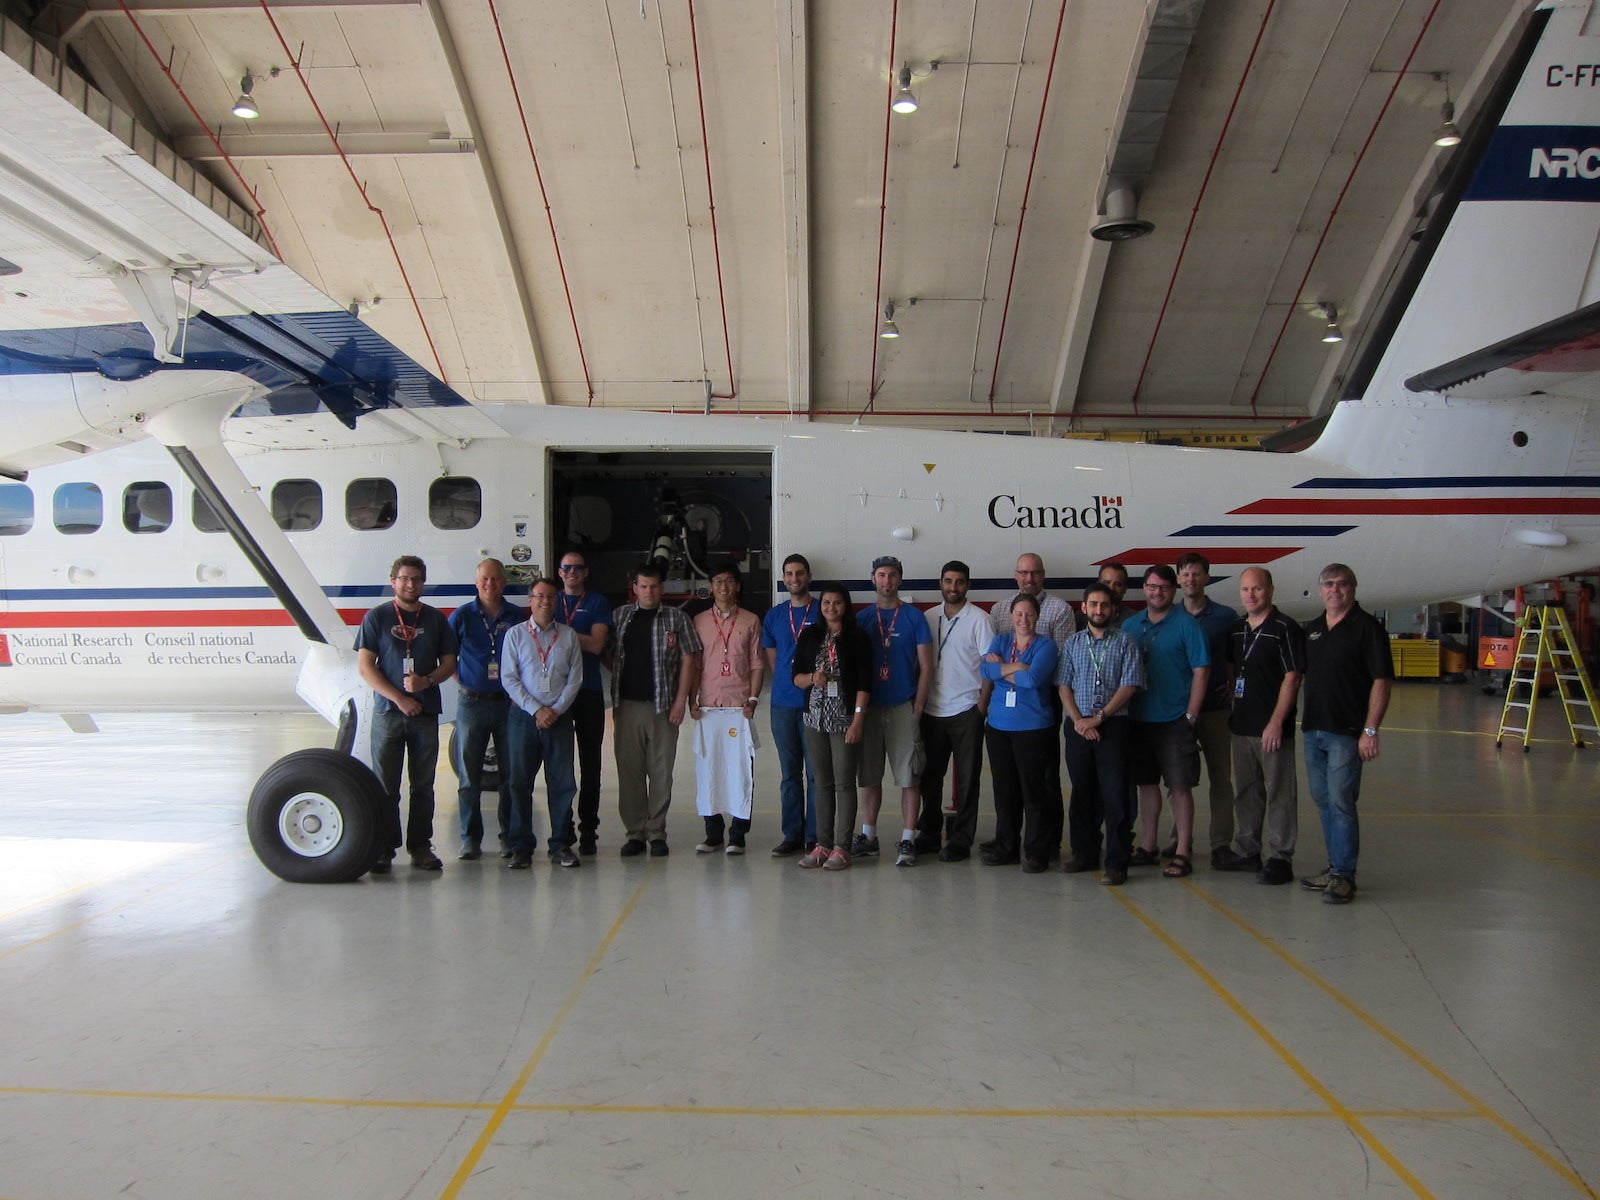 QKD airborne demonstration - a plane sits in the hanger in Smith Falls, Ottawa with a team of researchers standing by.